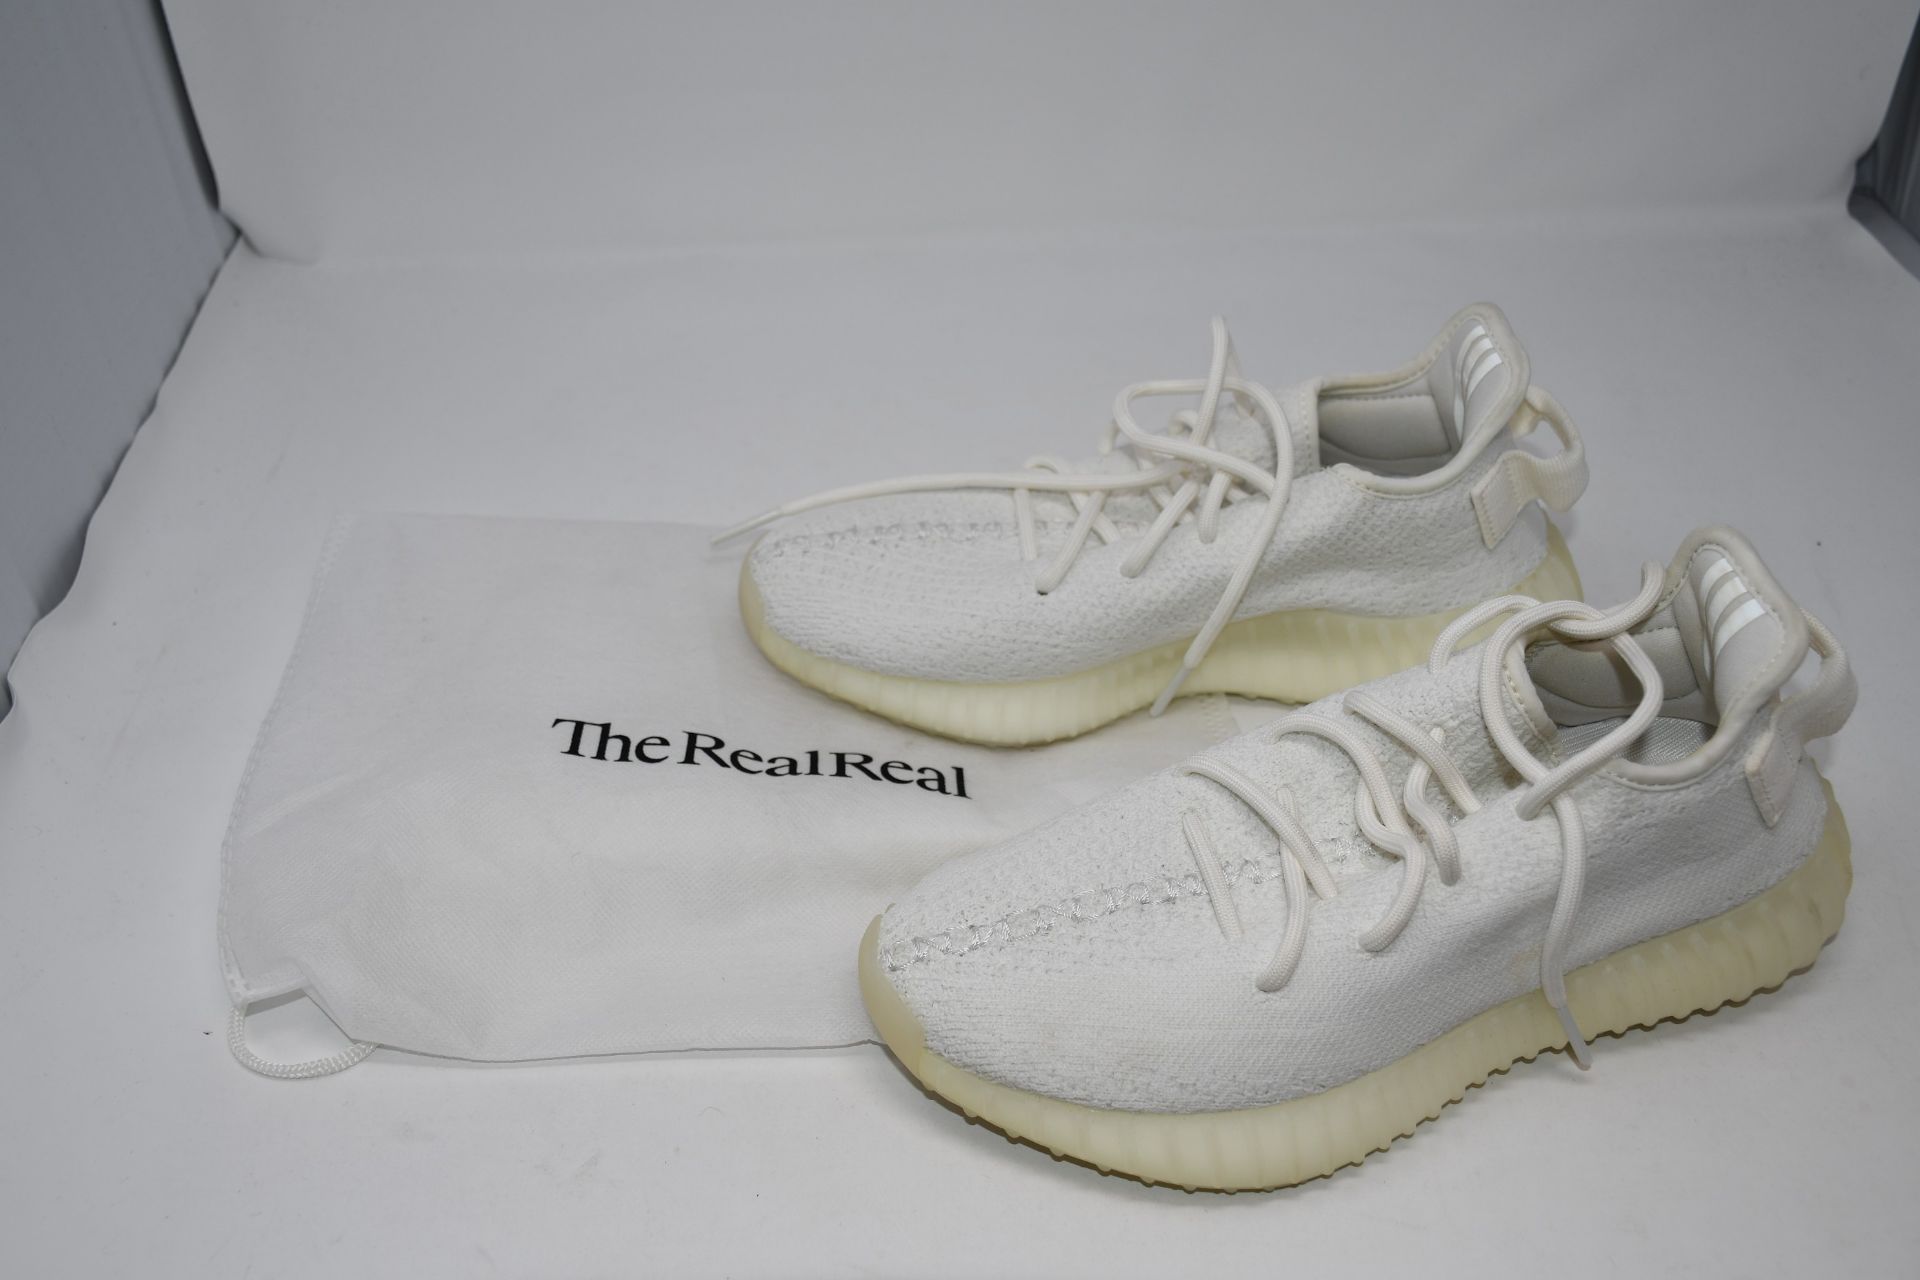 One pre-owned Adidas Yeezy Boost 350 V2 Cream White size UK 5.5 (cp9366).